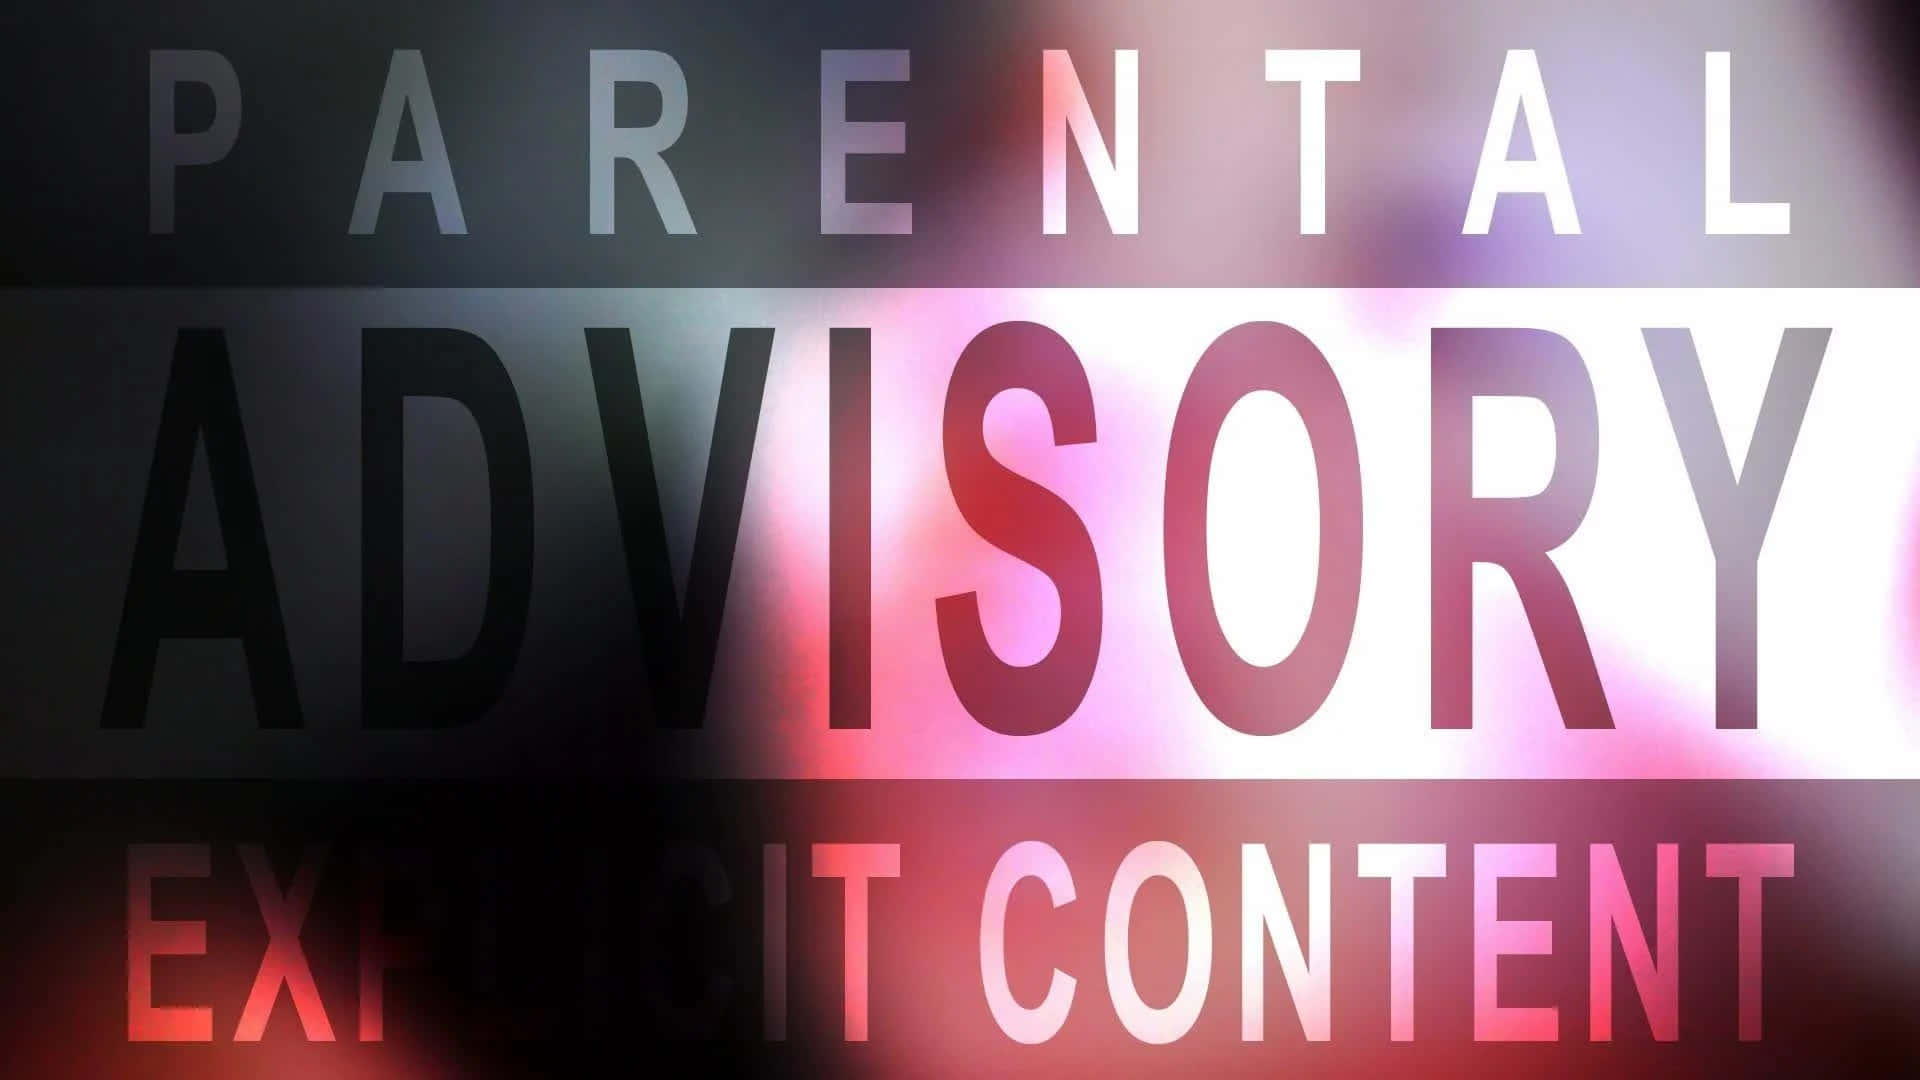 A Blurred Image Of The Words Parental Advisory Explicit Content Wallpaper